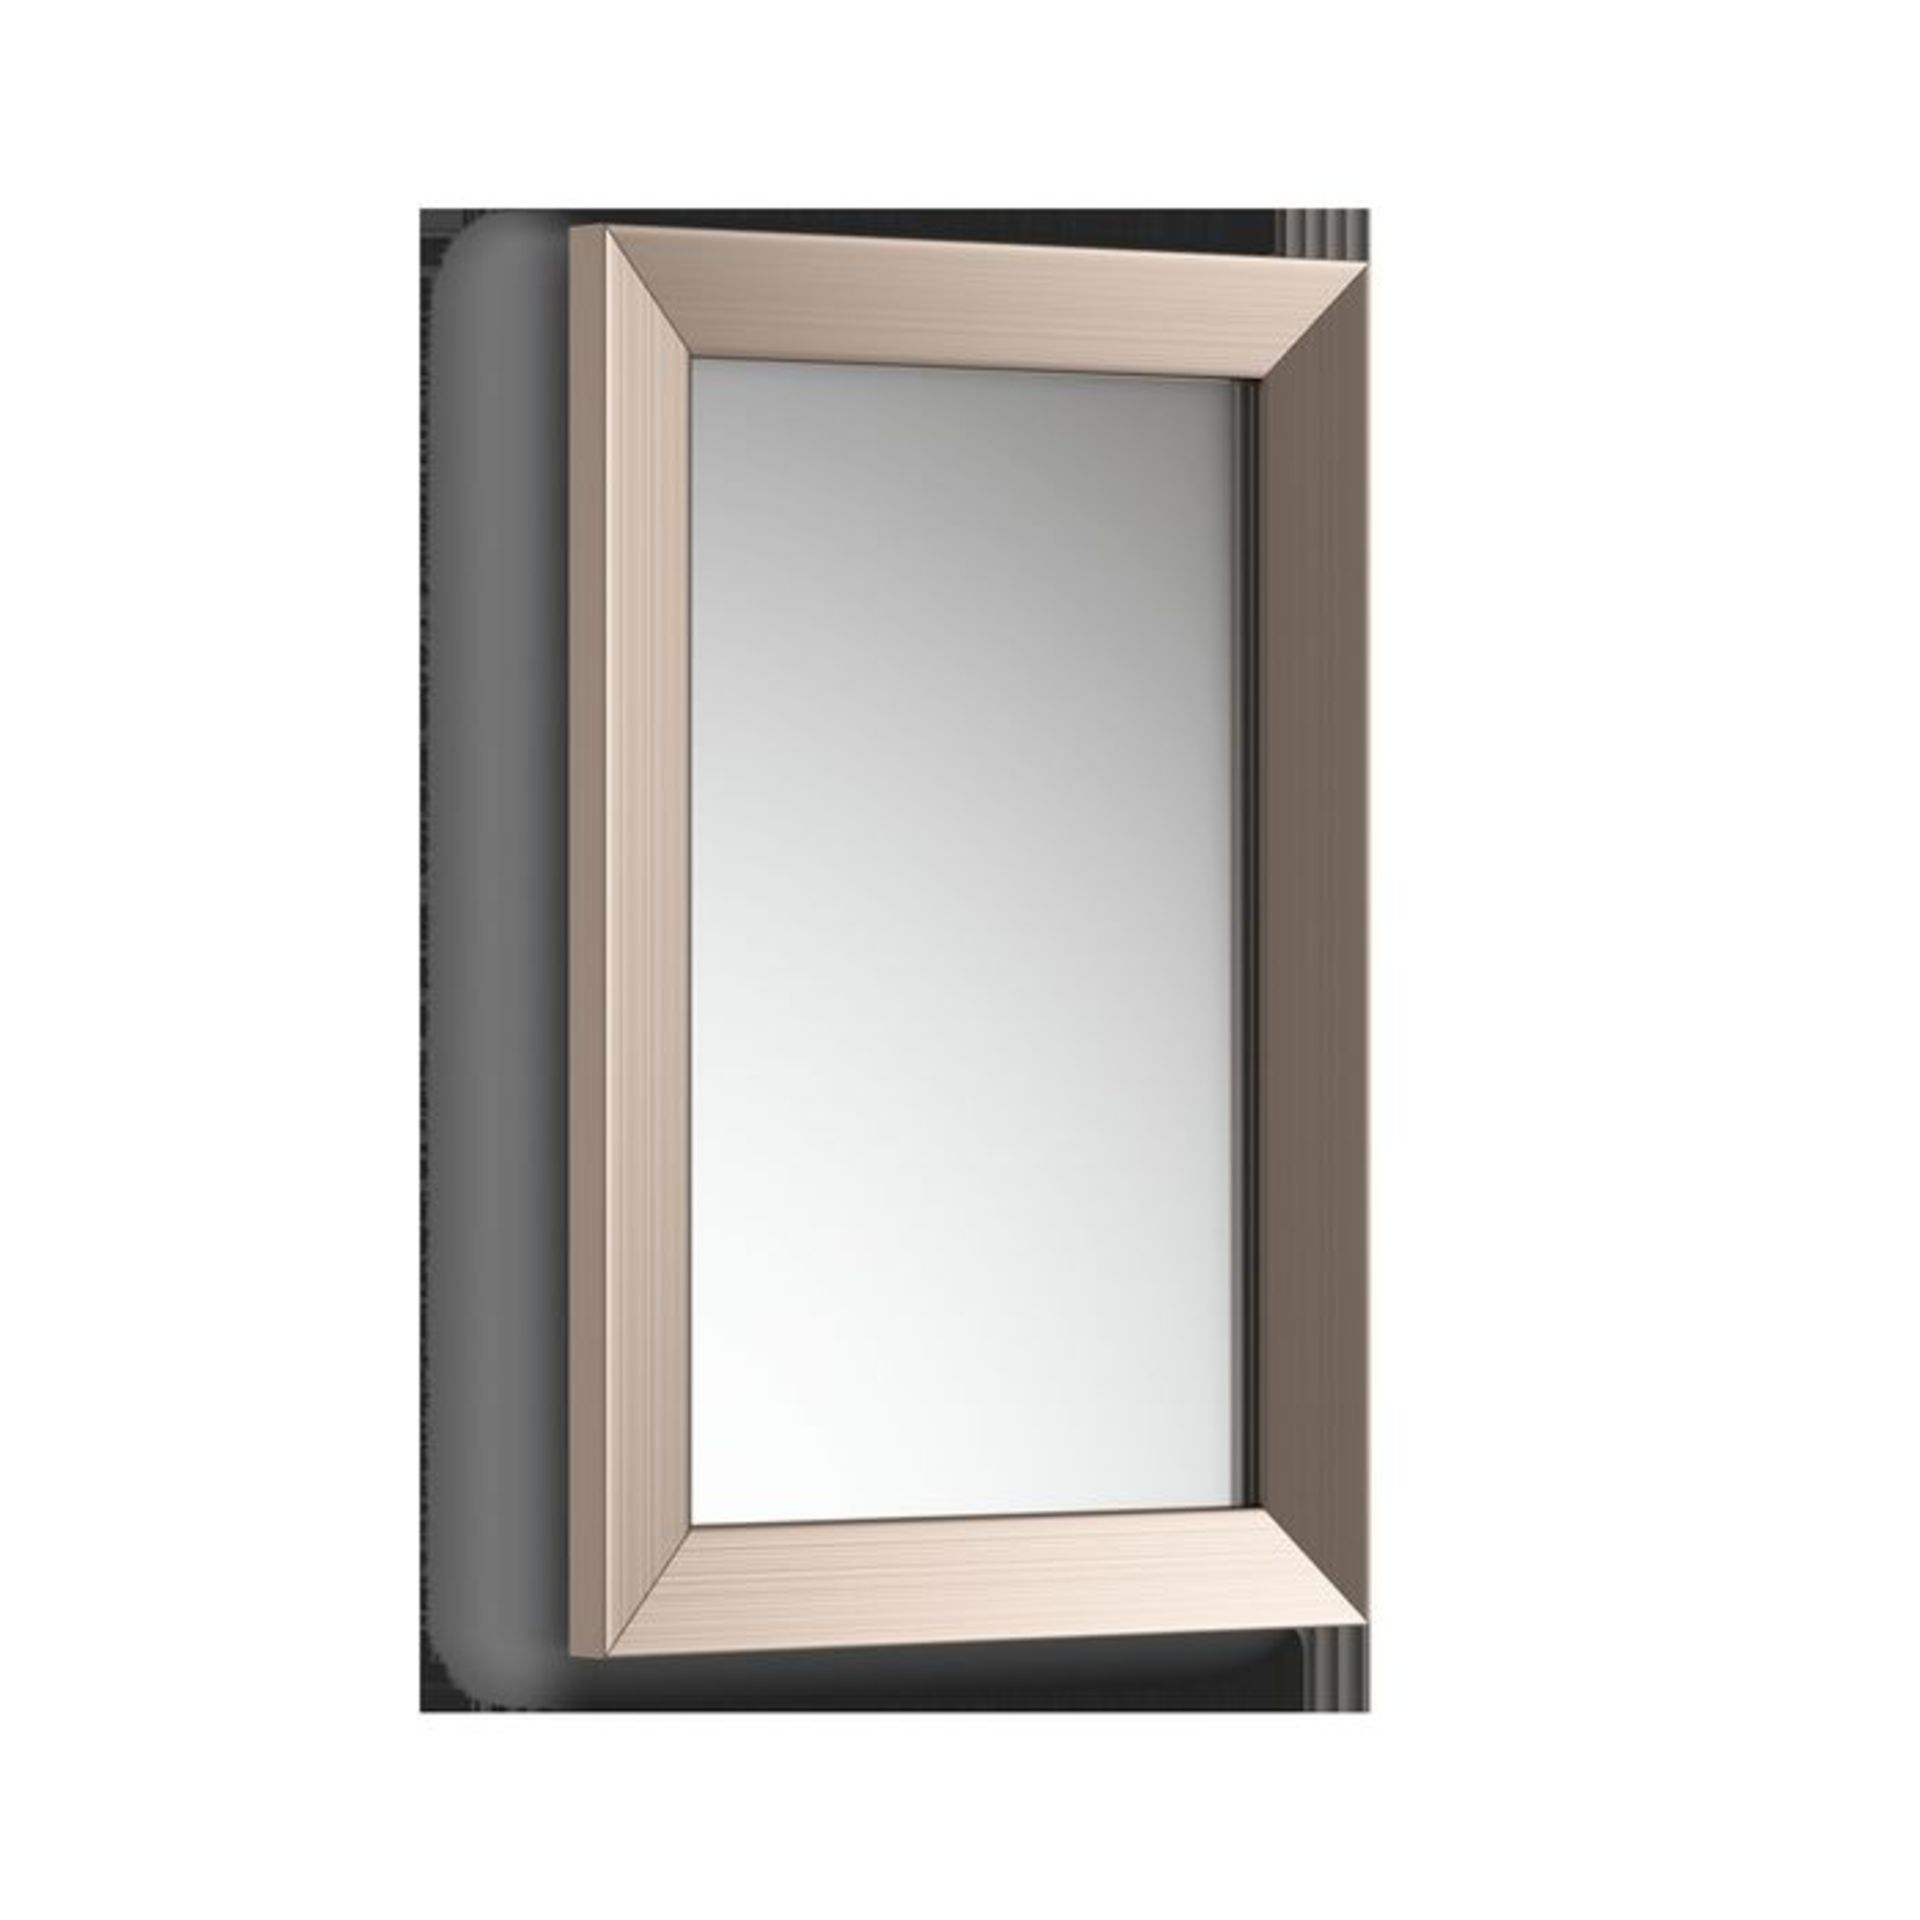 (QP34) 300x450mm Clover Metallic Nickel Framed Mirror. Made from eco friendly recycled plasti... ( - Image 3 of 3